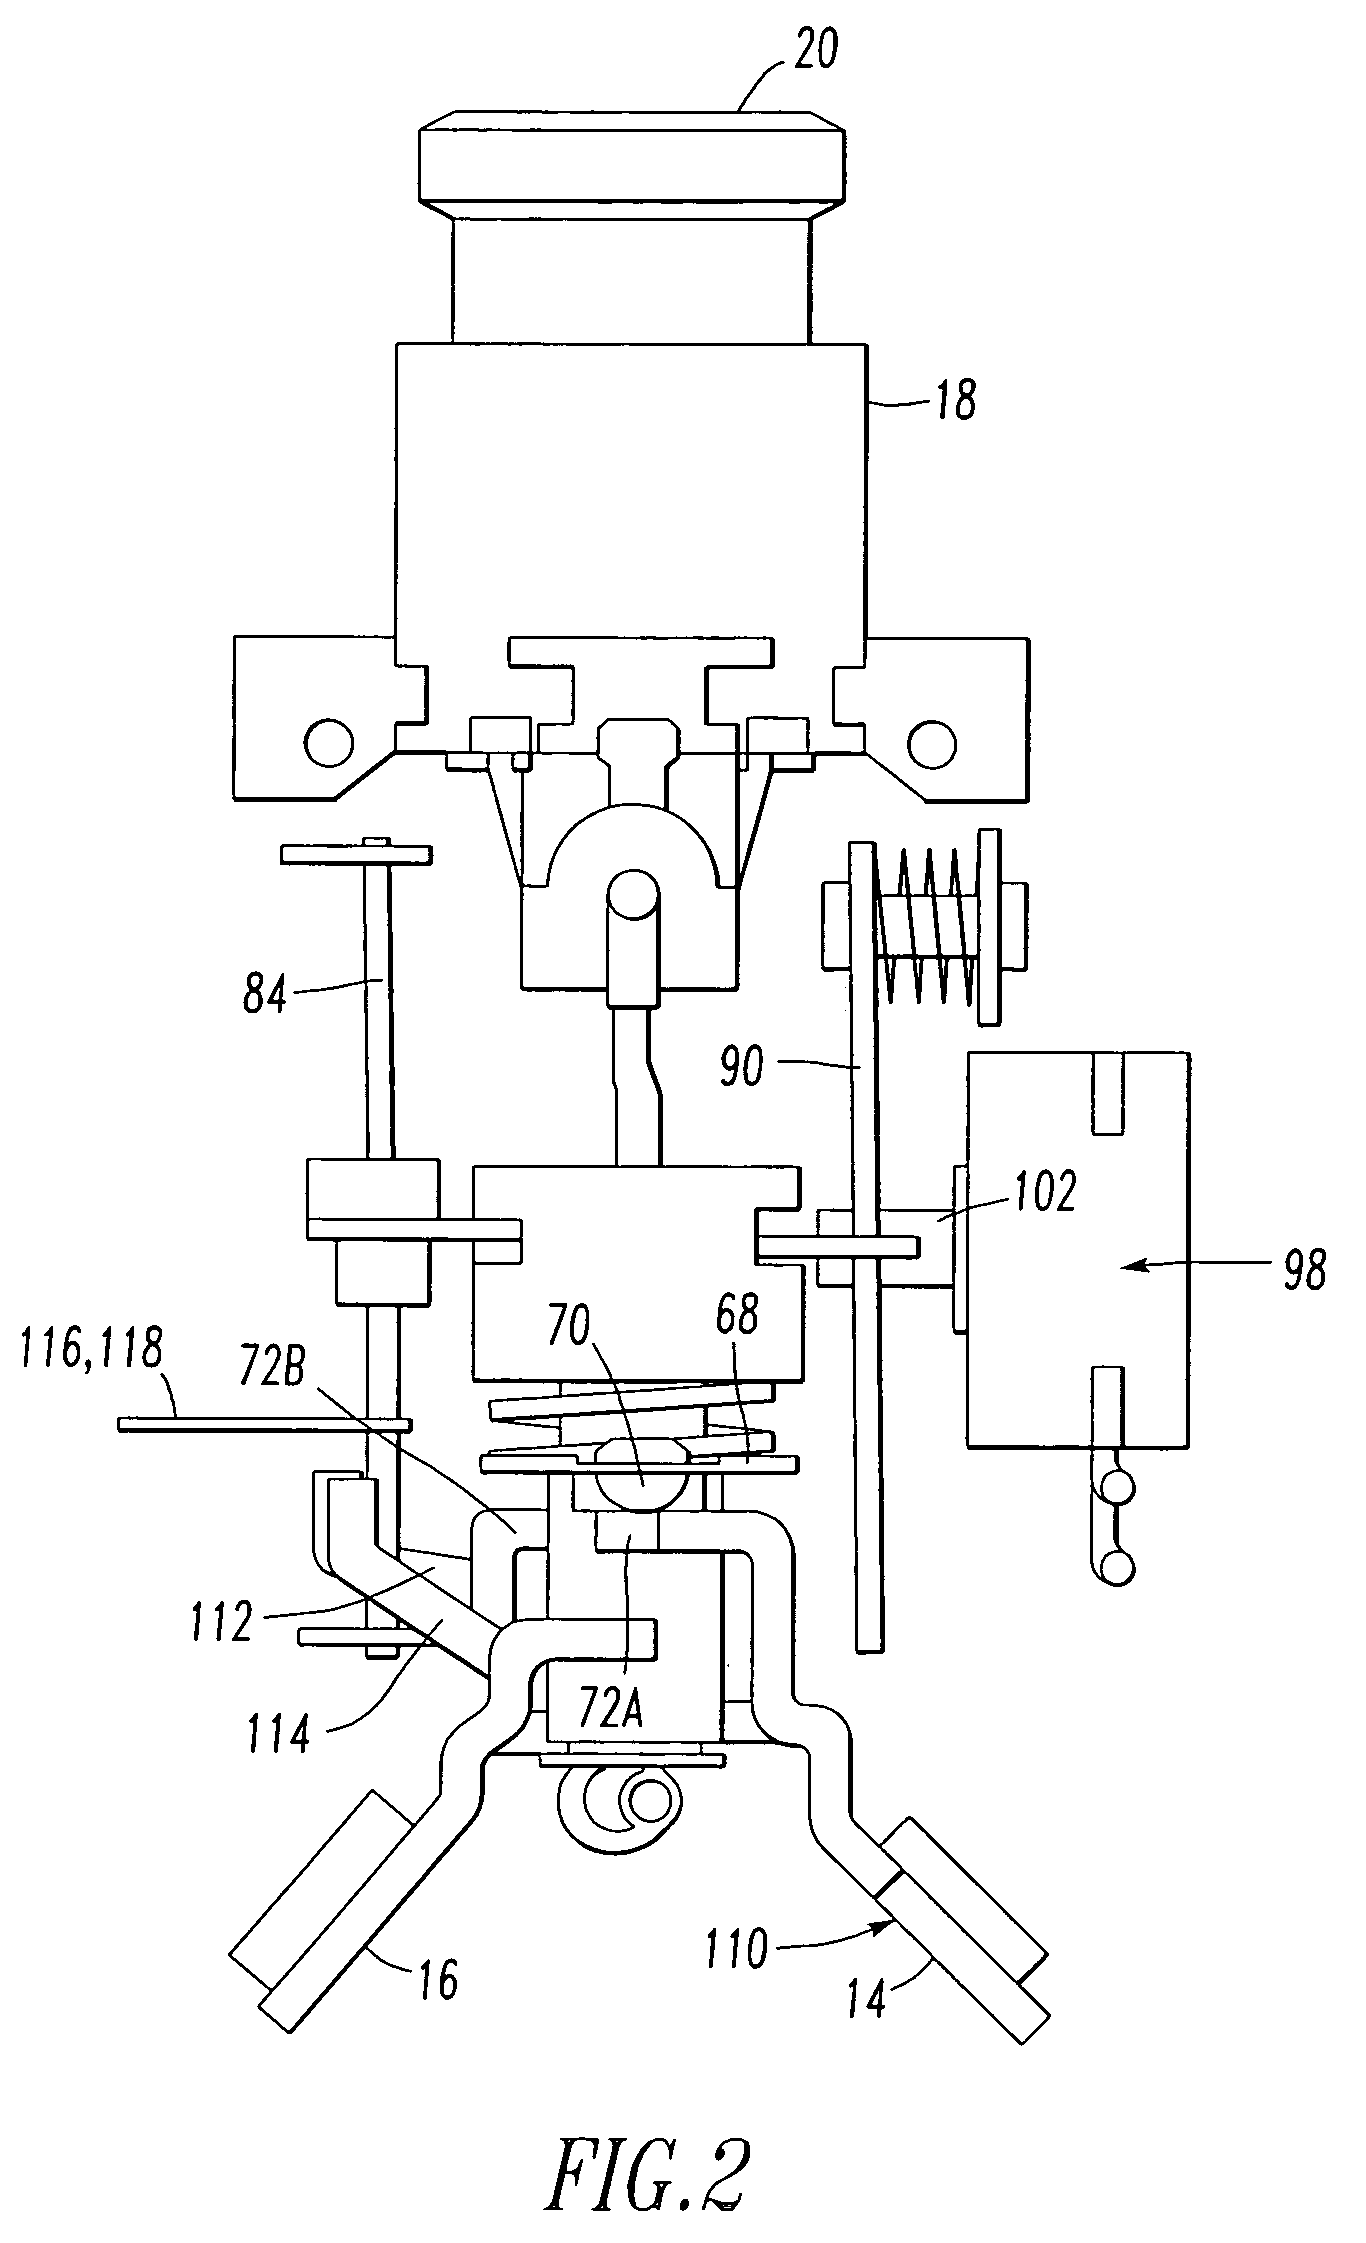 Electrical switching apparatus including a housing and a trip circuit forming a composite structure